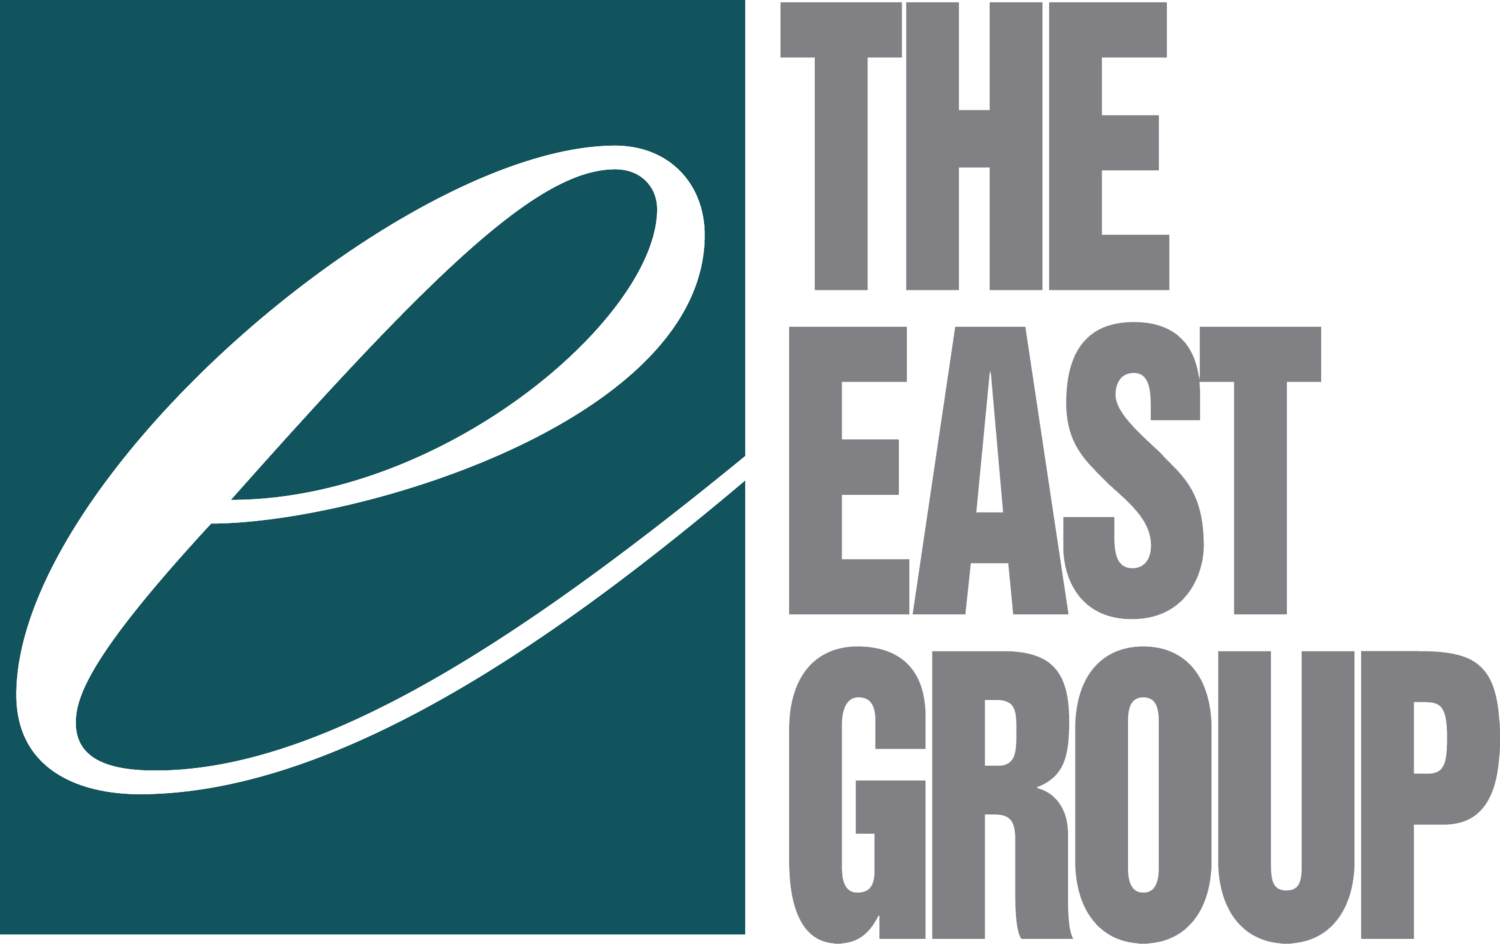 The East Group